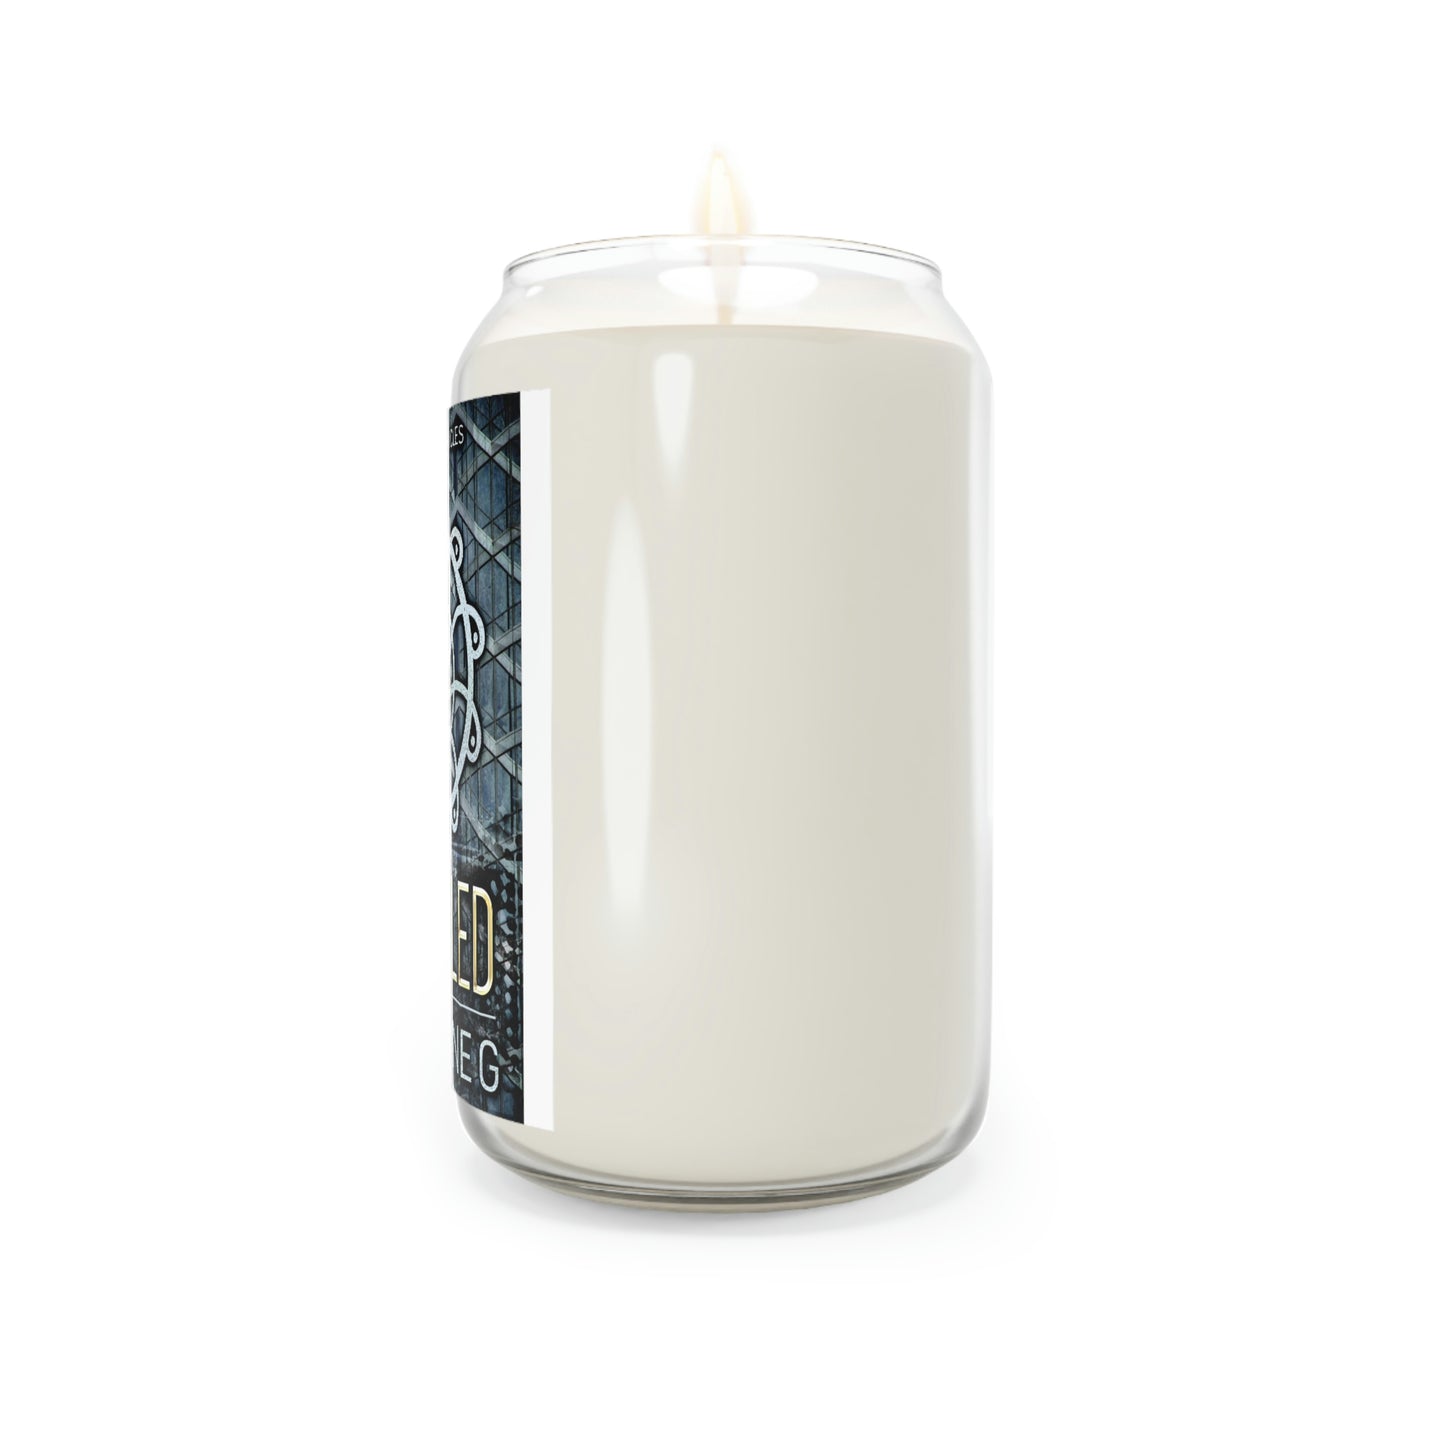 The Revealed - Scented Candle